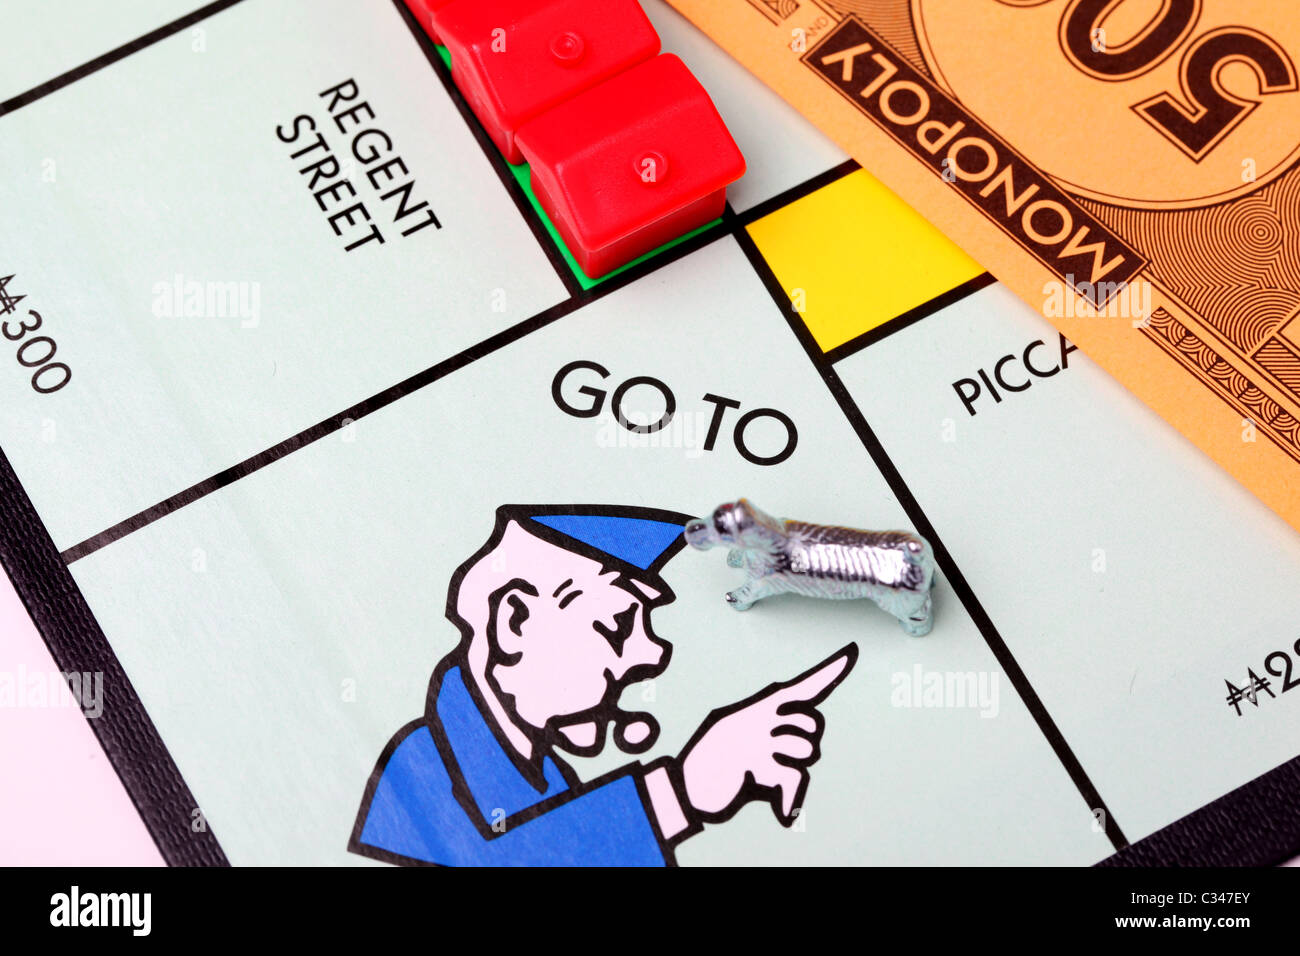 Go to Jail in Monopoly Stock Photo